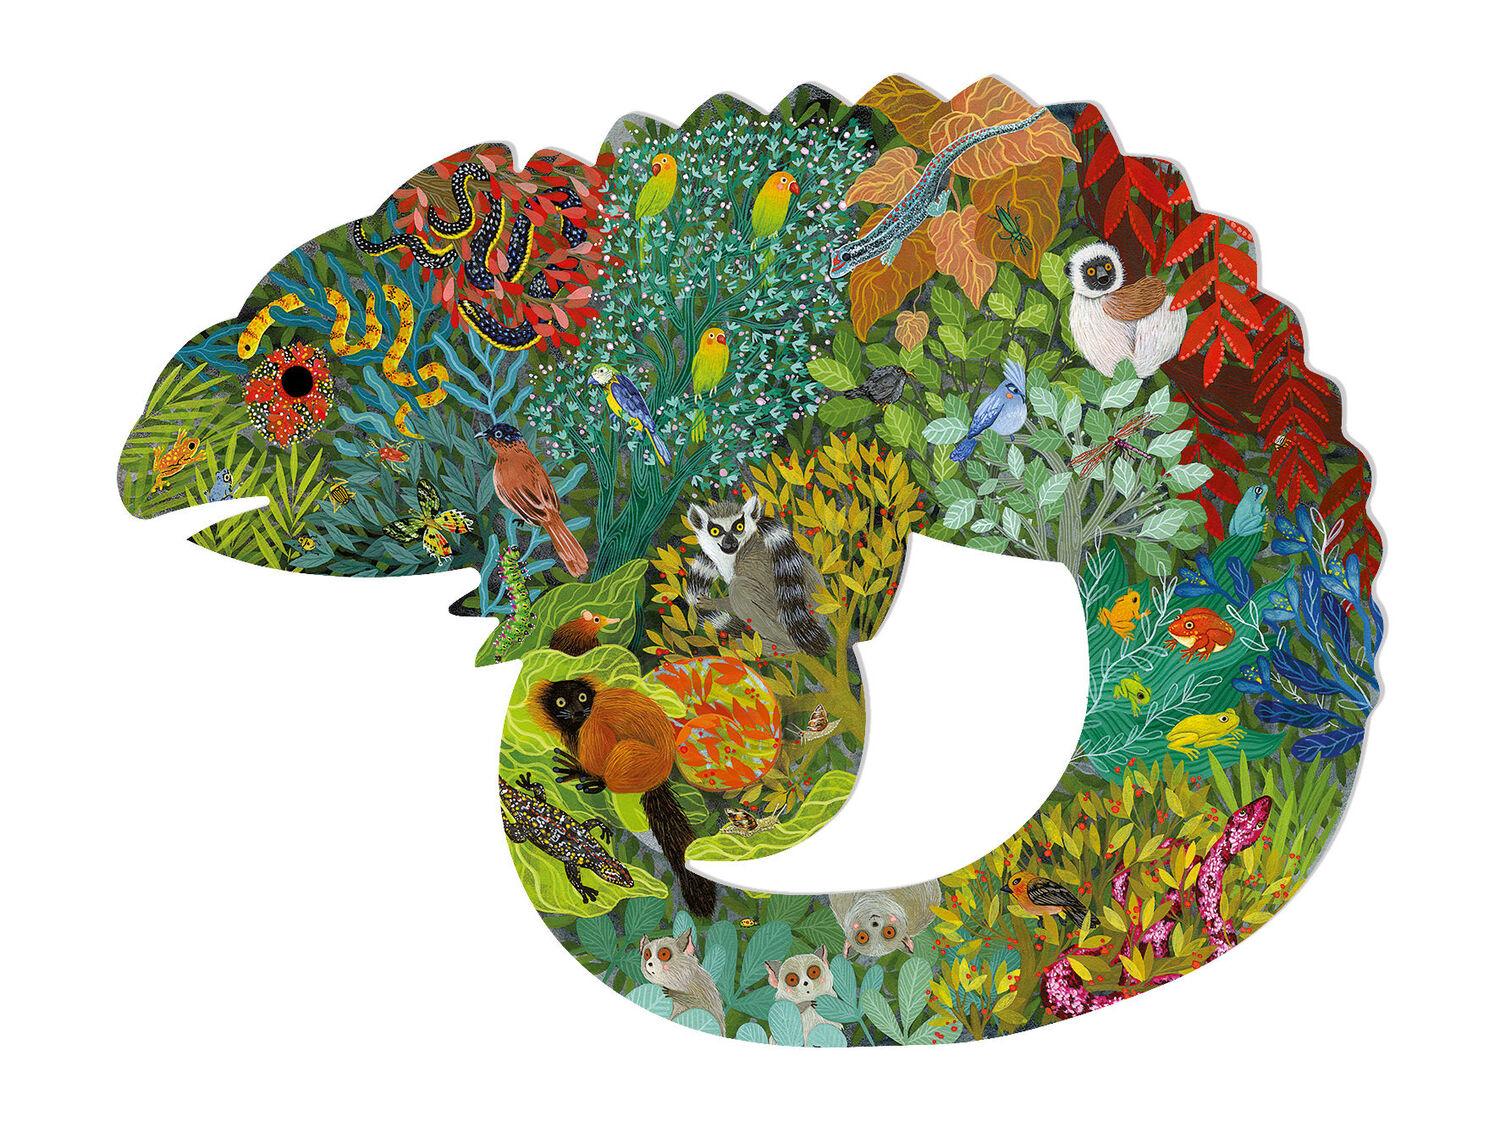 Completed 150 piece colourful chameleon-shaped jigsaw